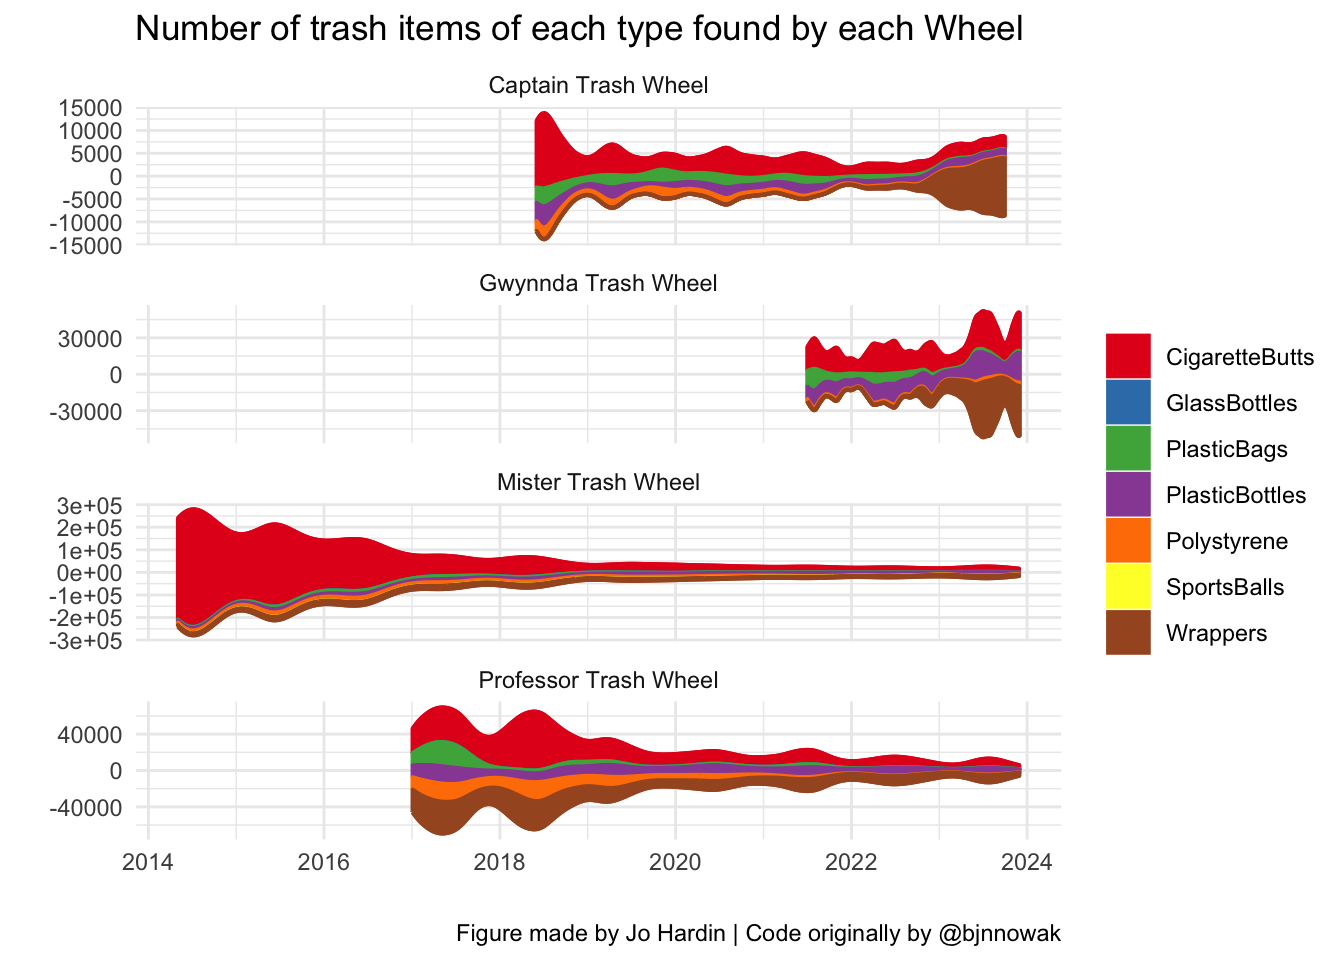 Stream plot over time from 2014 to 2024, faceted by the Wheel that collected the trash.  Stream plot gives the density of the variable, which here is number of trash items. The trash items are: cigarette butts, glass bottles, plastic bags, plastic bottles, polystyrene, sports balls, and wrappers. Mr Trash Wheel is the oldest and collected most of its trash between 2014 and 2017. When other Wheels were introducted, Mr Wheel seemed to collect less trash, but maybe other things change (e.g., the amount of trash in the bay overall).